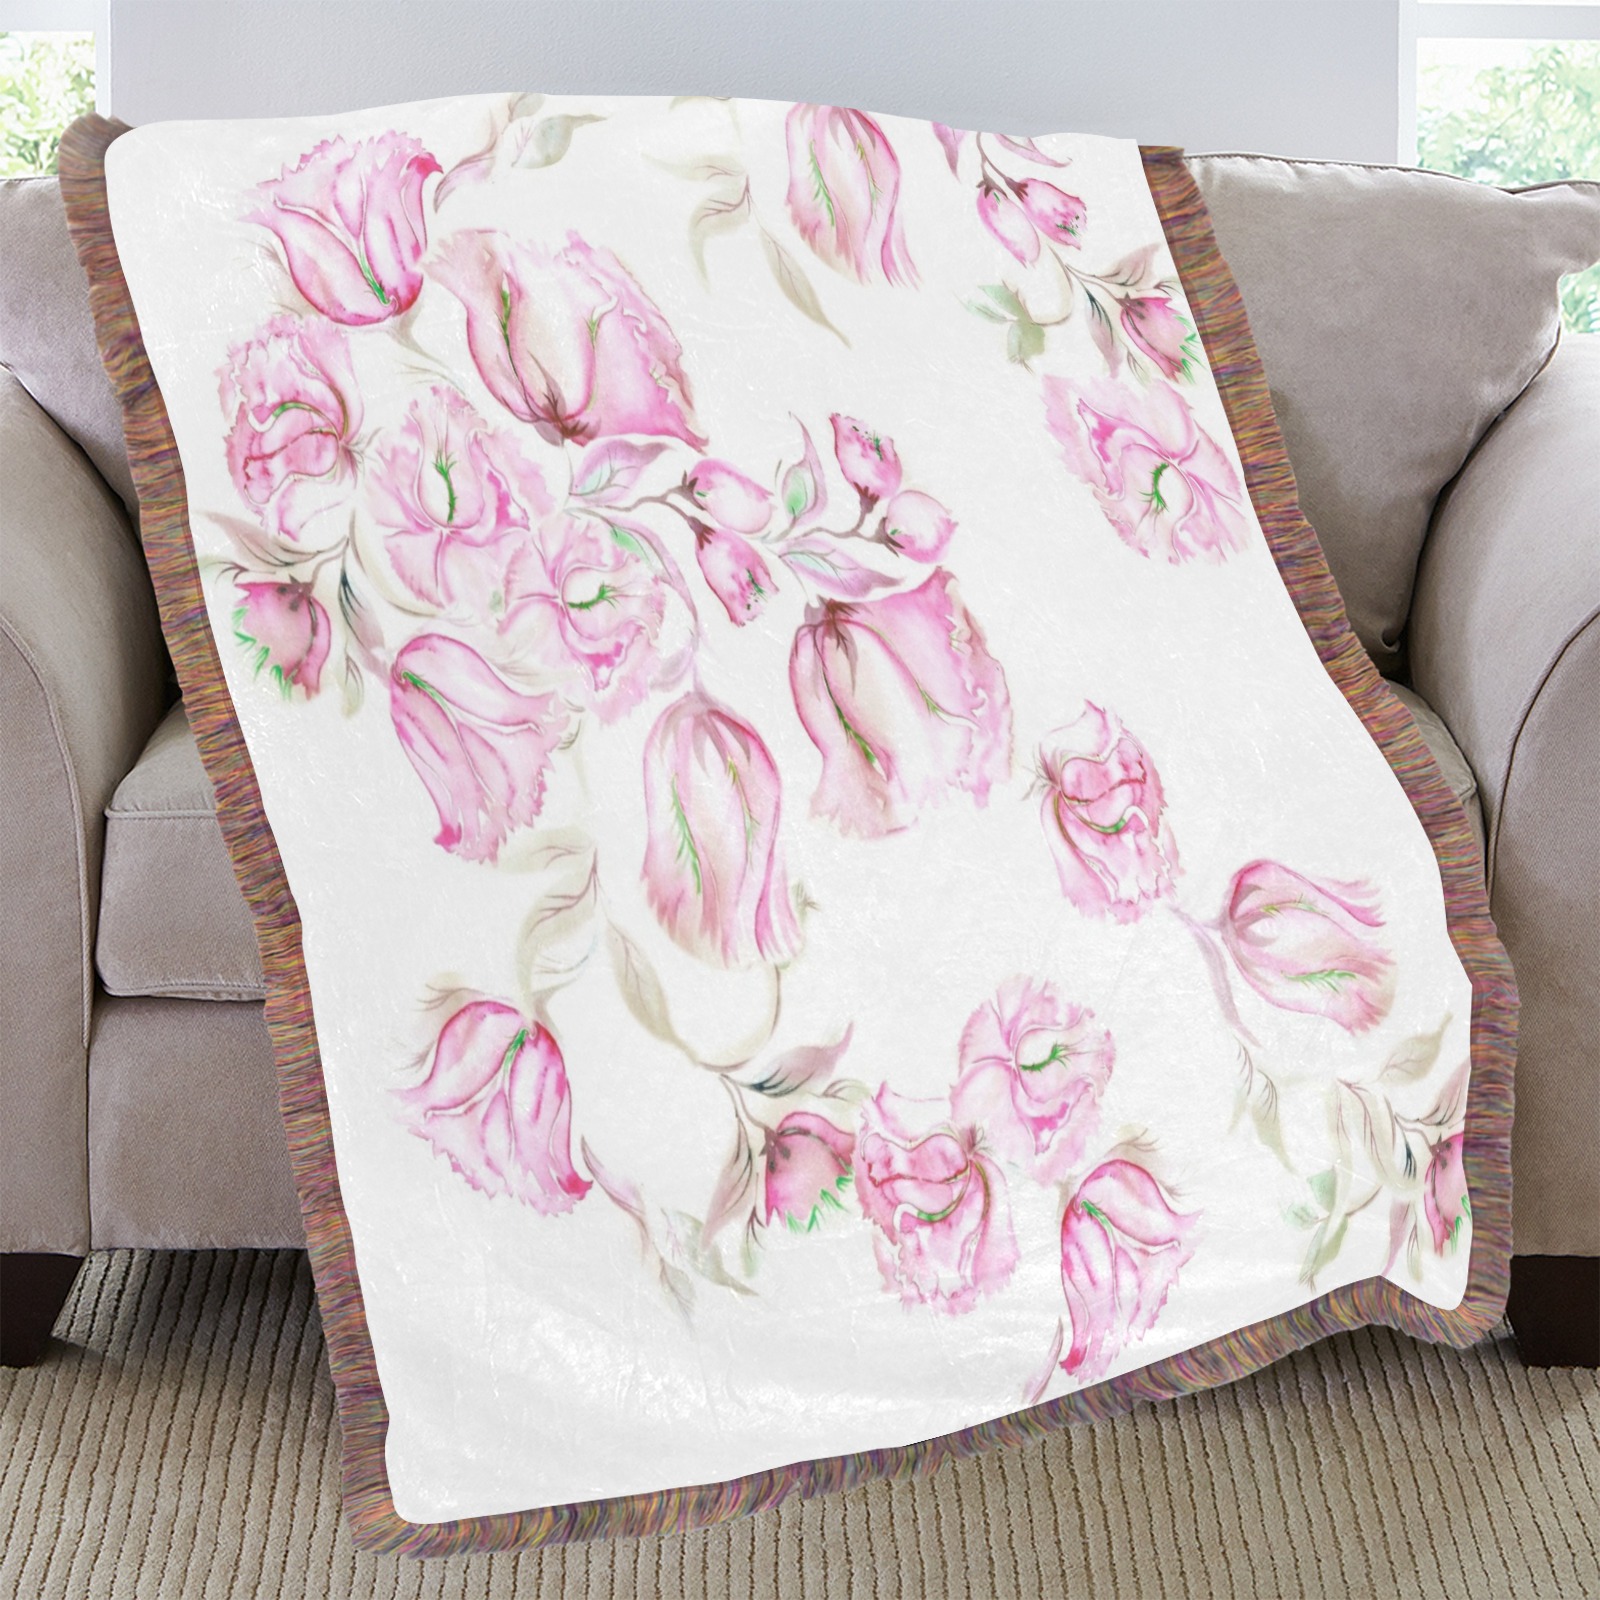 Chinese Peonies 3 Ultra-Soft Fringe Blanket 50"x60" (Mixed Green)